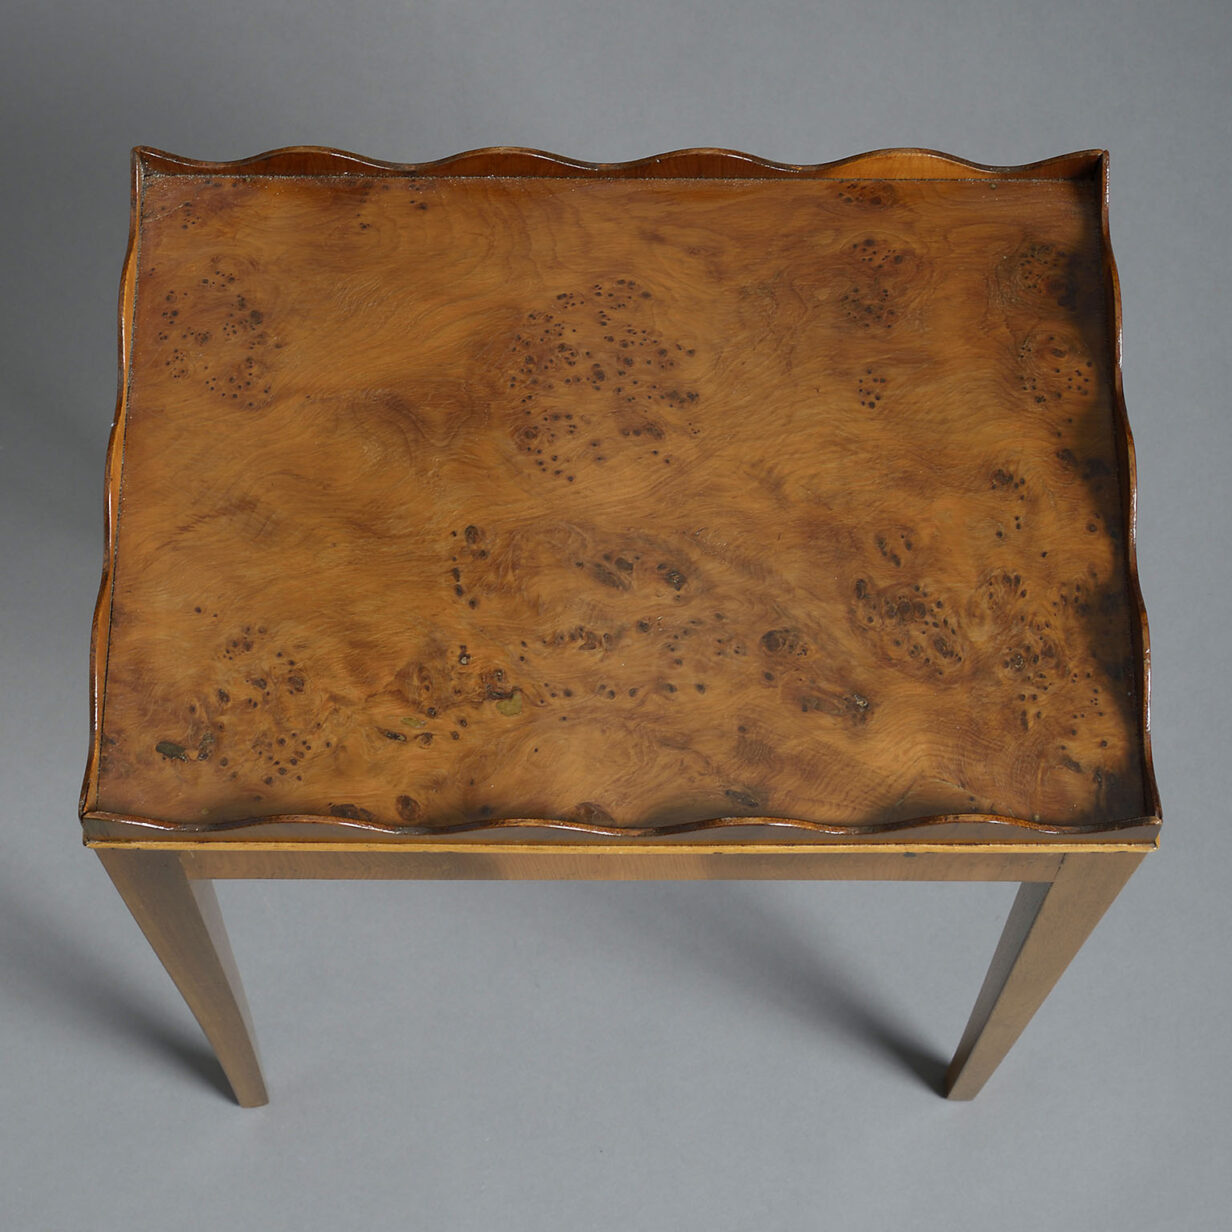 Pair of burr yew wood end tables in the george iii manner